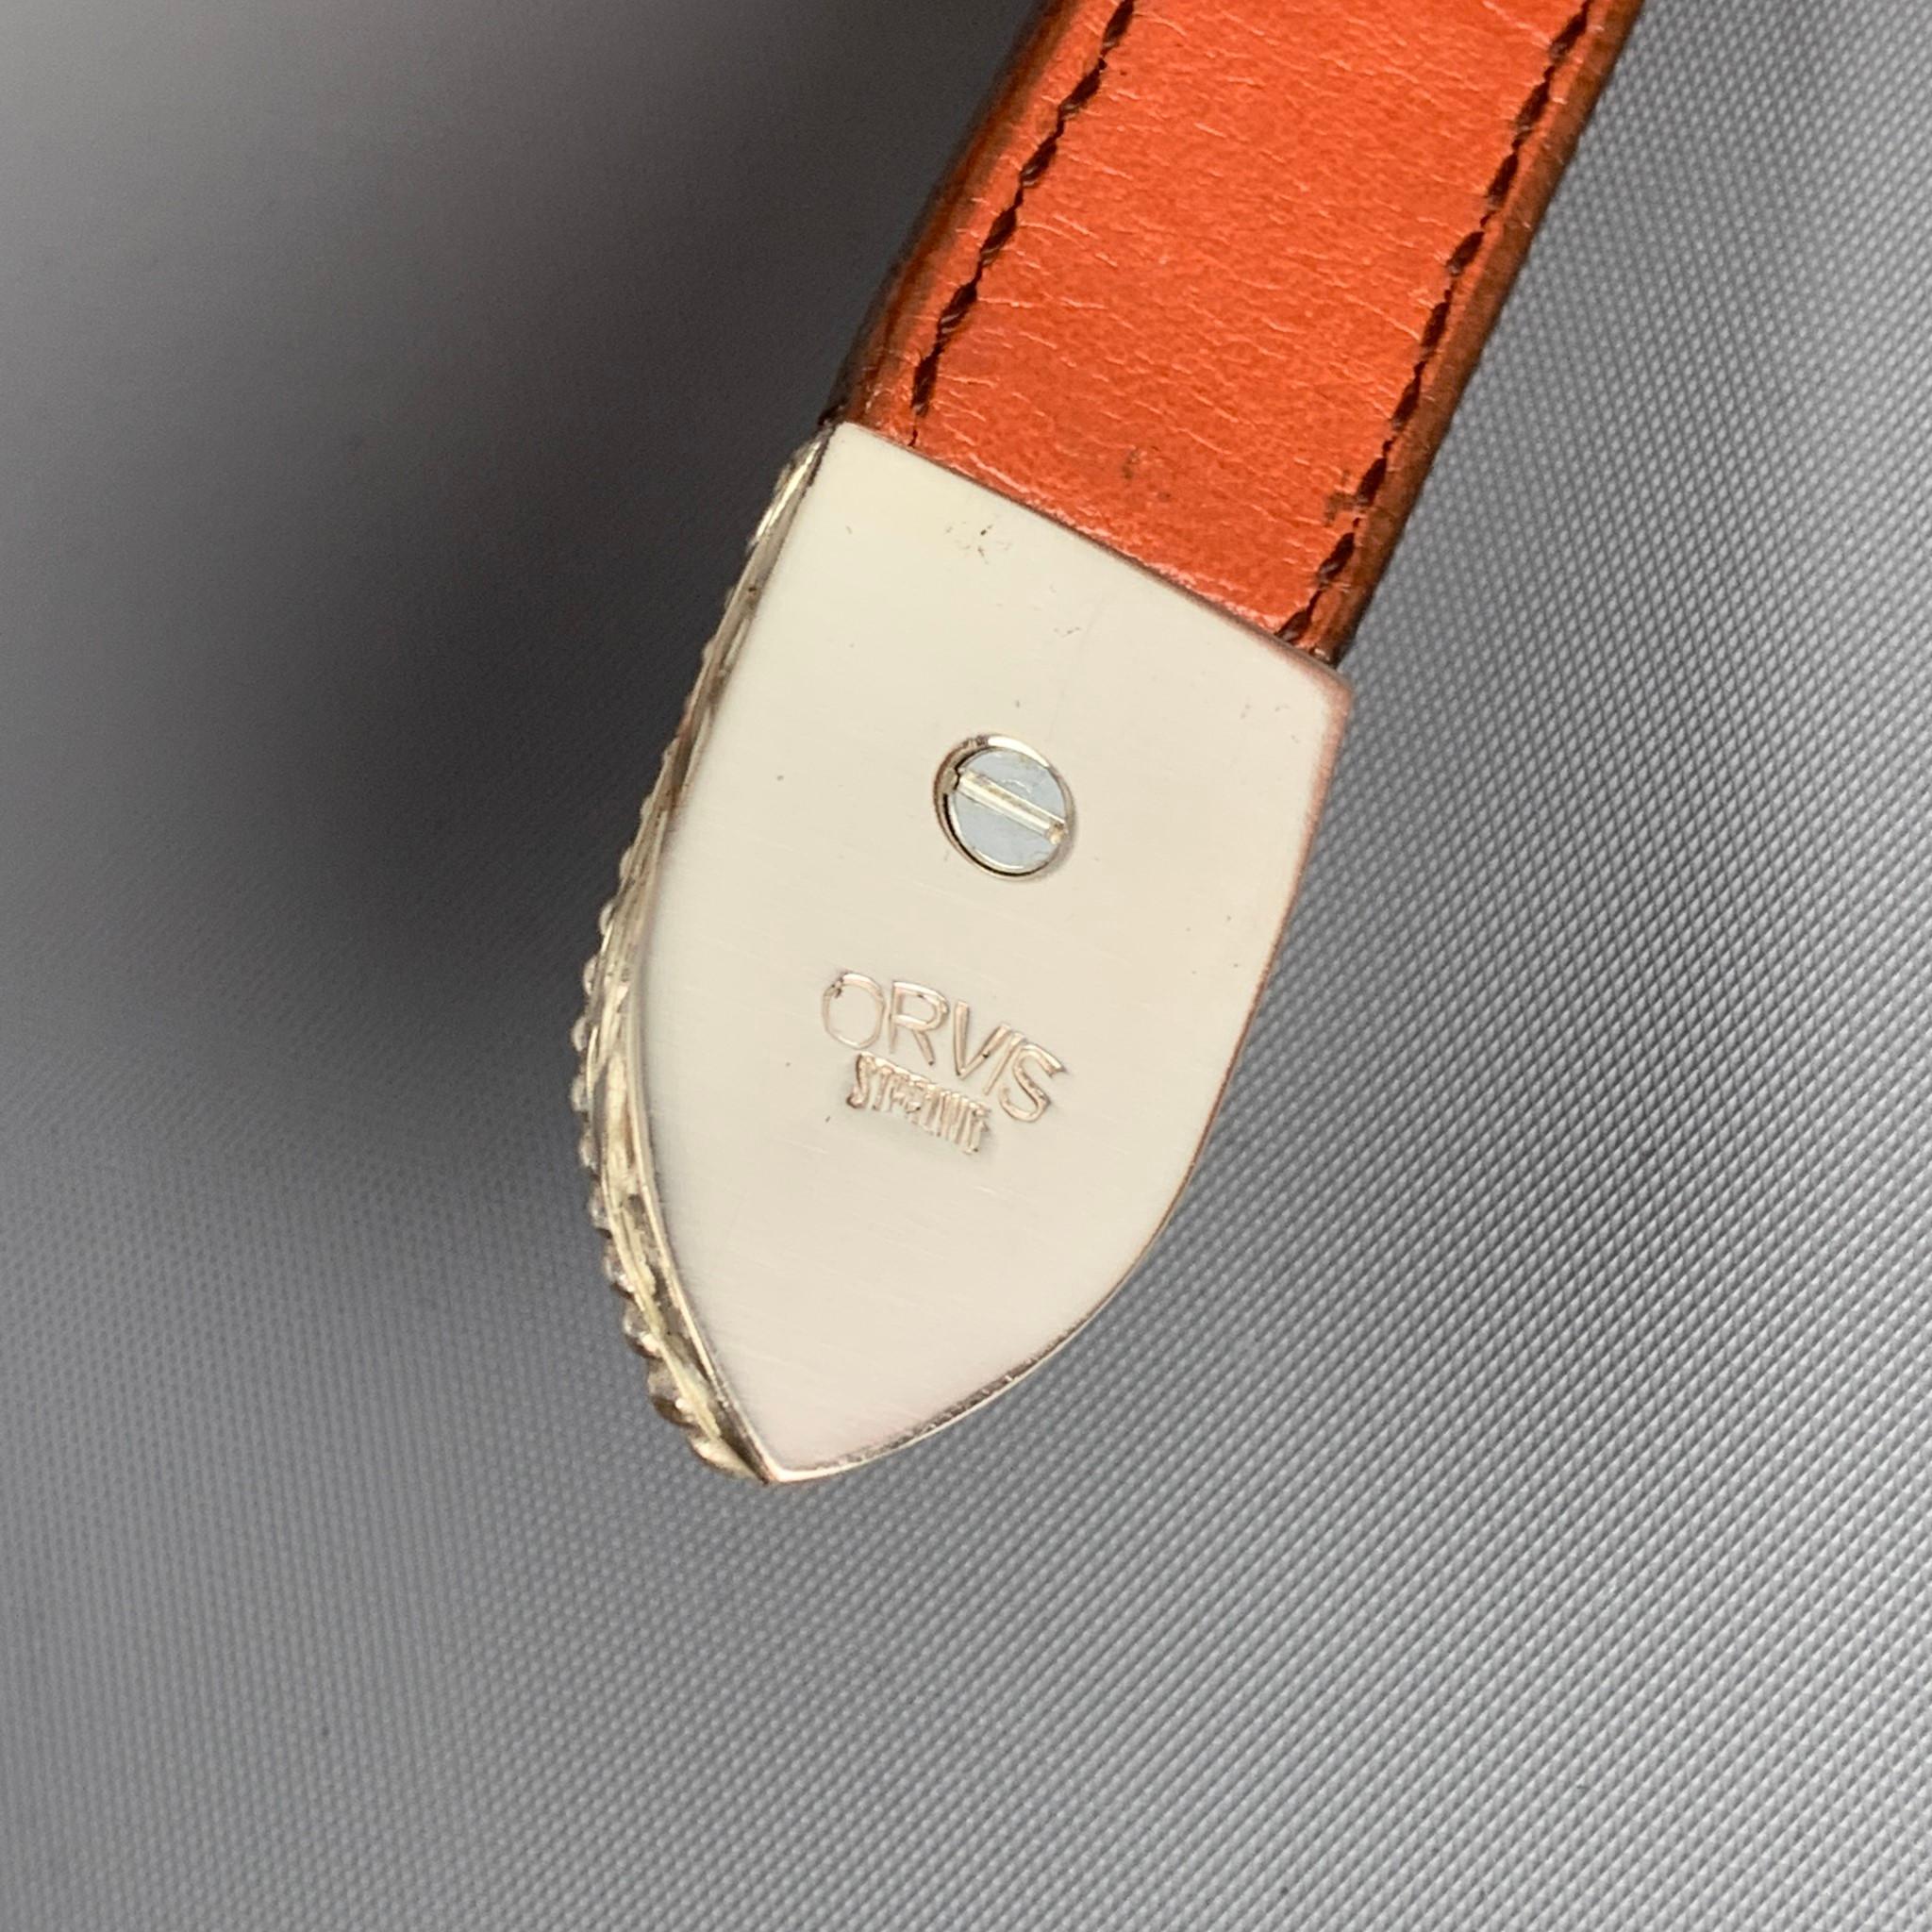 ORVIS belt comes in a brown textured top grain saddle leather featuring contrast stitching and a sterling silver buckle. 

Excellent Pre-Owned Condition.
Marked: 041-4100 36

Length: 43.5 in.
Width: 1.25 in.
Min Length: 36 in.
Max Length: 39